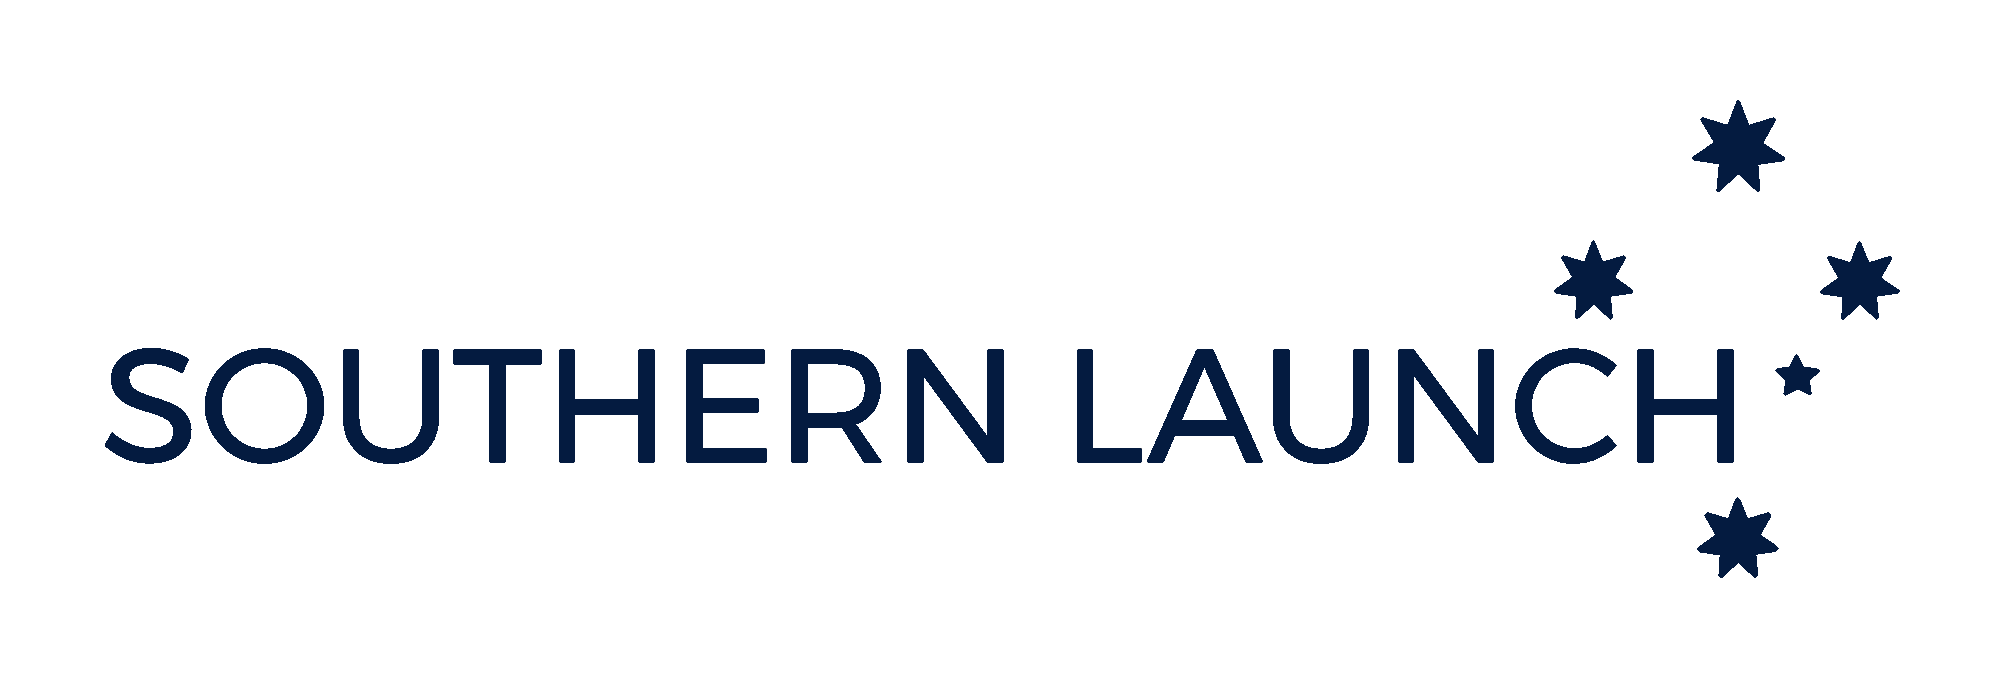 Southern_Launch_Navy_Logo_.png